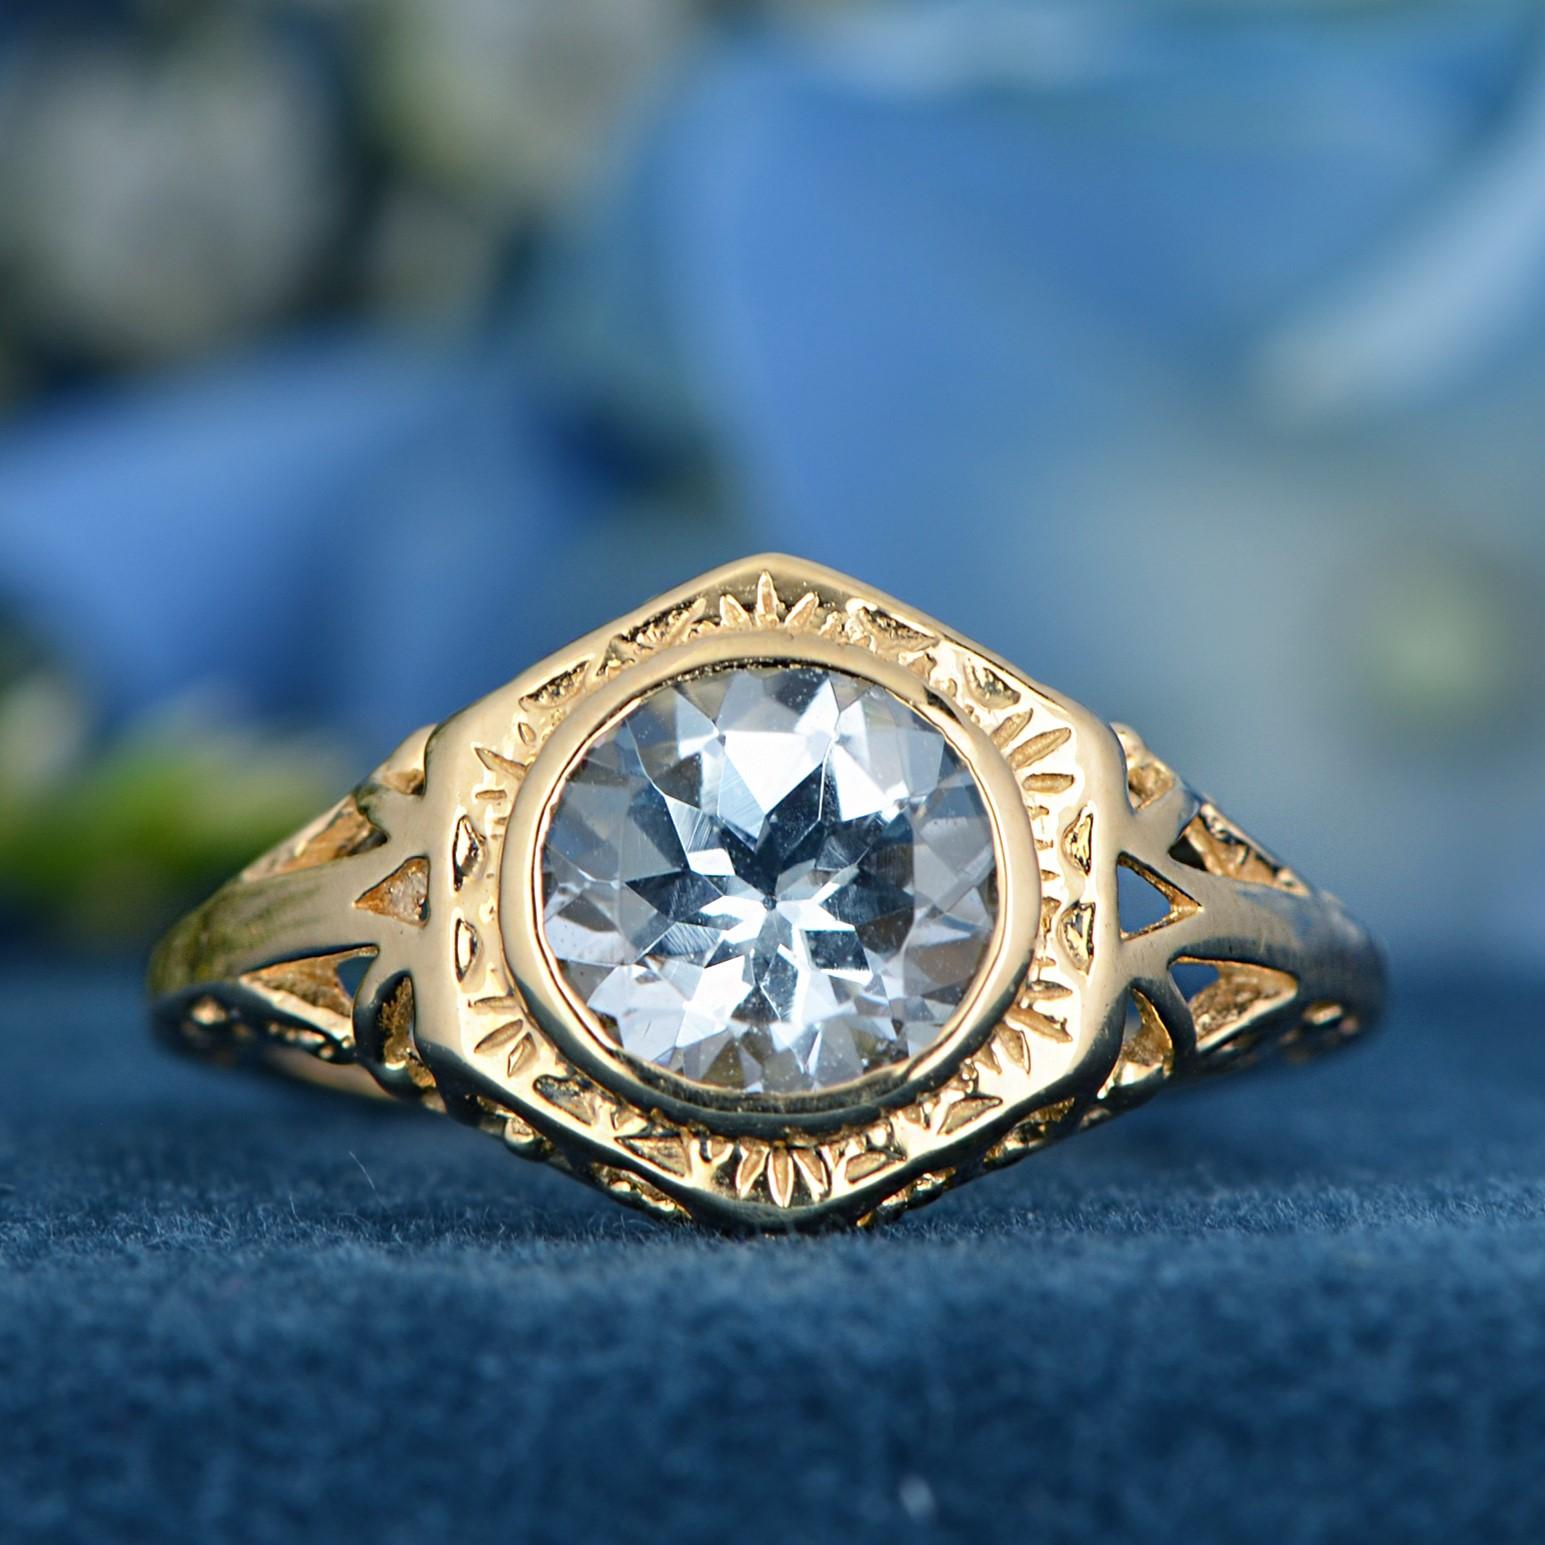 Natural Aquamarine Hexagon Shape Vintage Style Filigree Ring in Solid 9K Gold 2